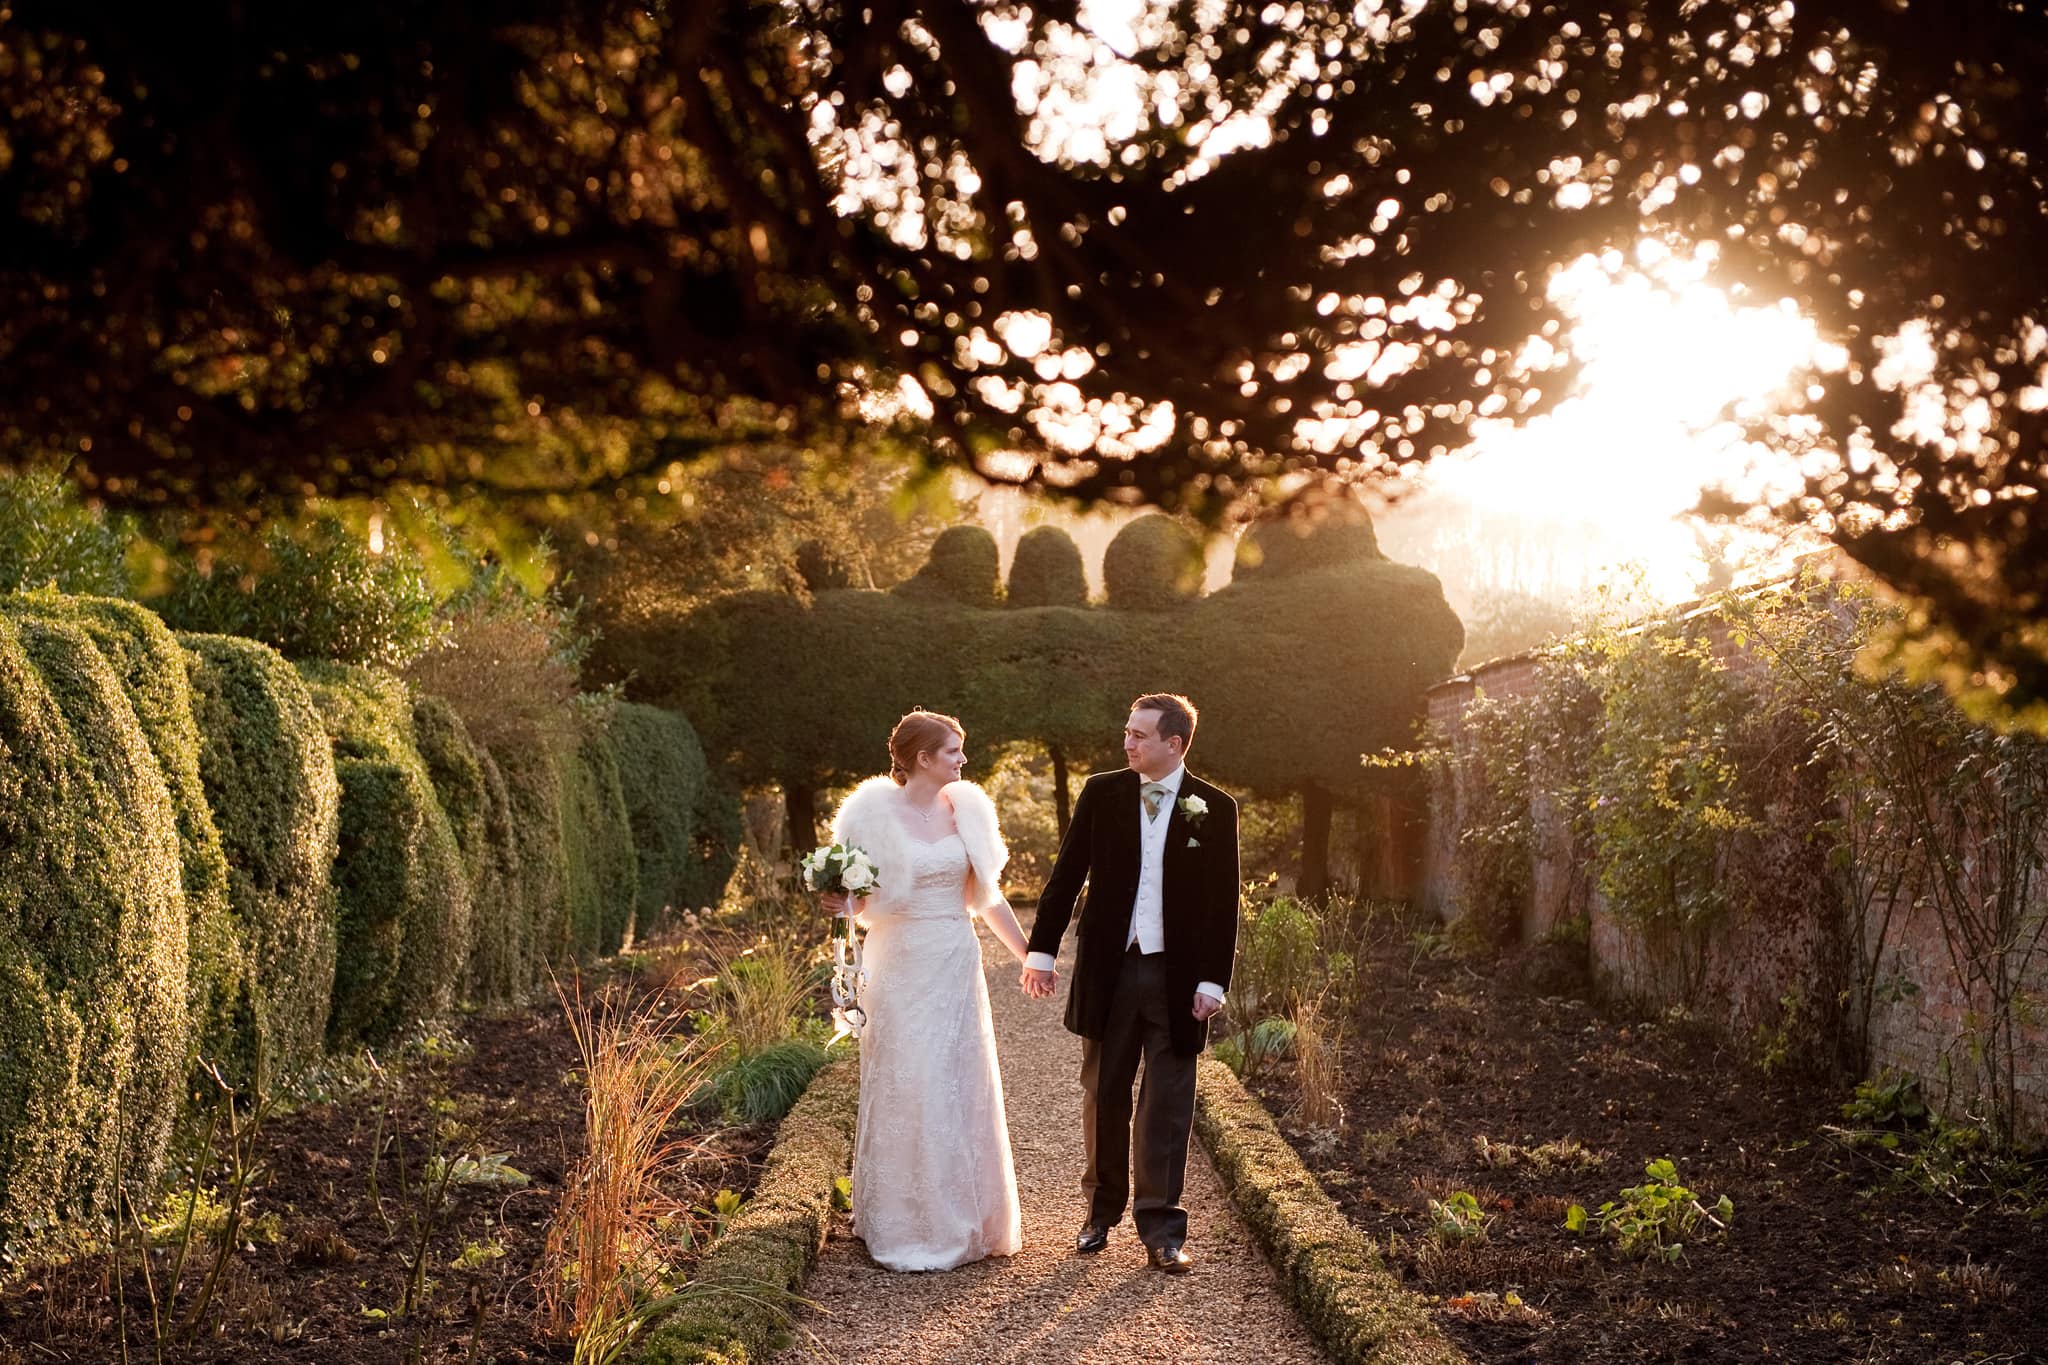 Couple walking down the long border in Kelmarsh Hall gardens lit by the golden hour sun behind them